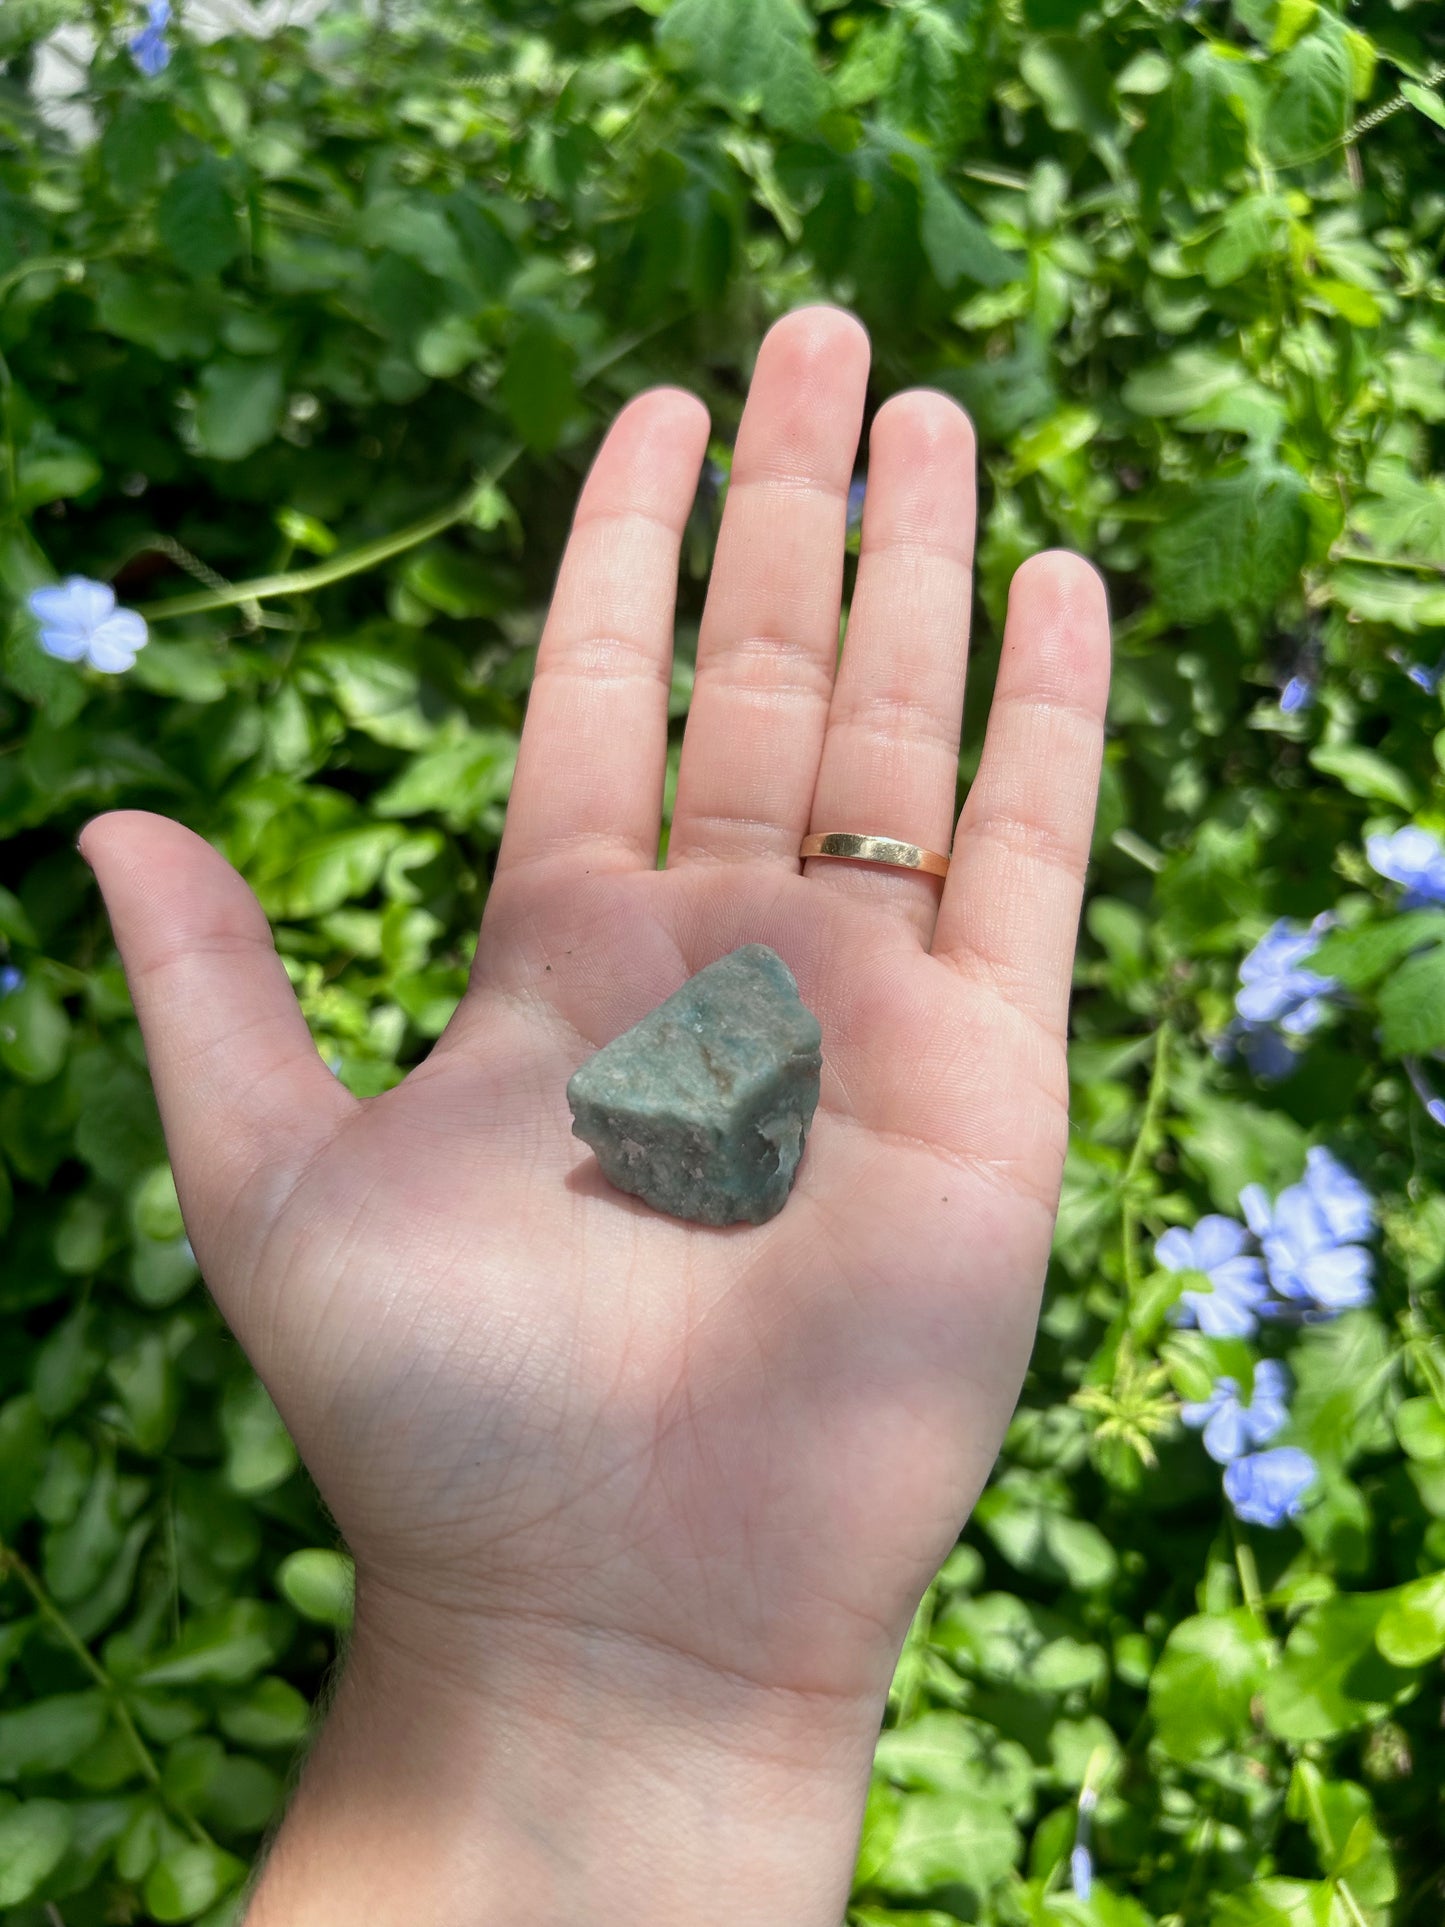 amazonite stone, 0.5 oz. picture is taken outside with the stone in a hand, background is leaves and blue flowers. 